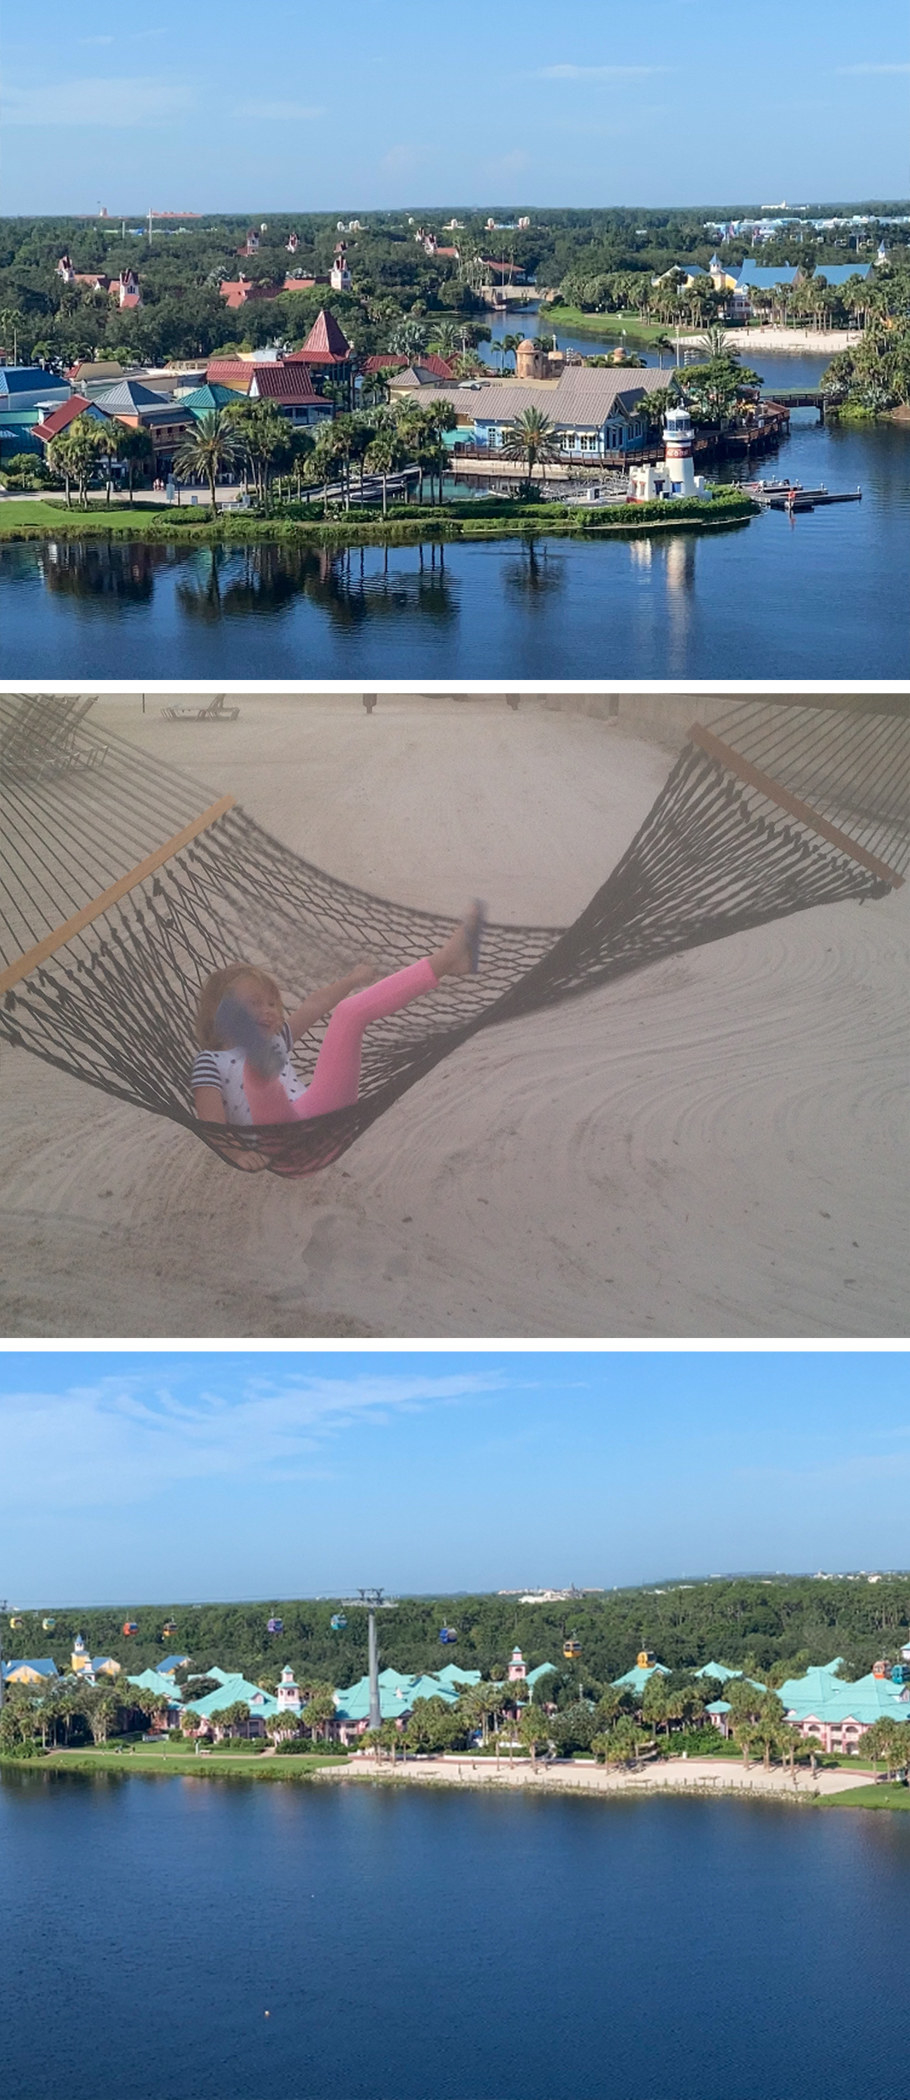 the resort by the water and a child in a hammock